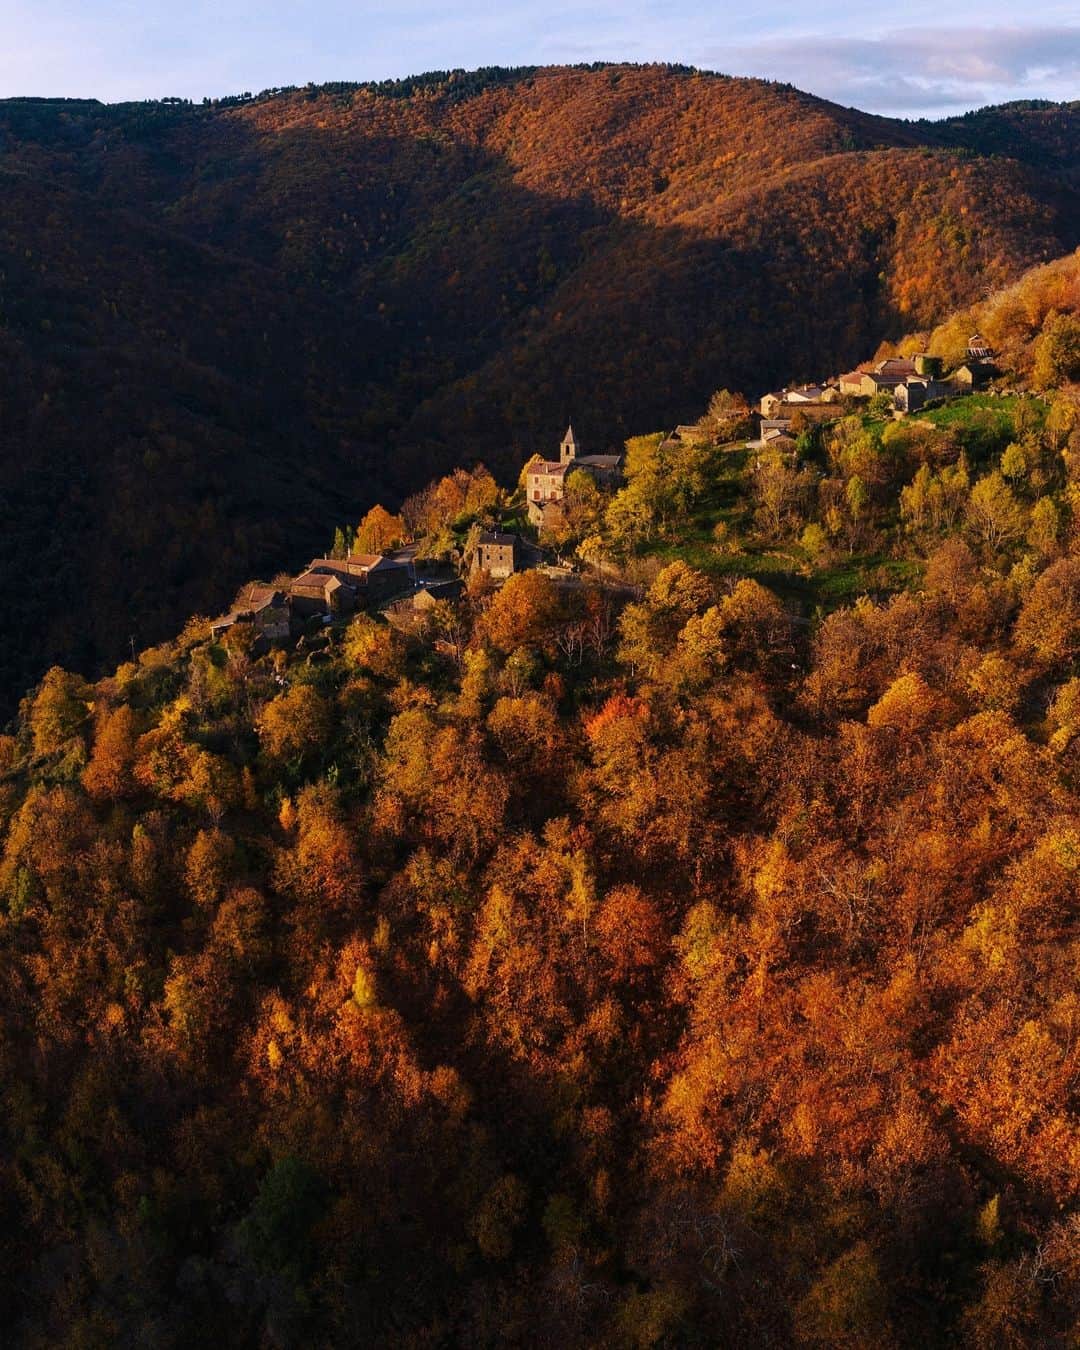 Alex Strohlのインスタグラム：「This morning in a deep Ardeche valley. I’ve been photographing this tiny village for a lot of years but this is the first time I try this wider perspective — usually I bring out the telephoto and fire away. Crazy that the chestnuts are at their peak colors mid November.. Usually this happens in late October. A very peaceful morning nonetheless.」